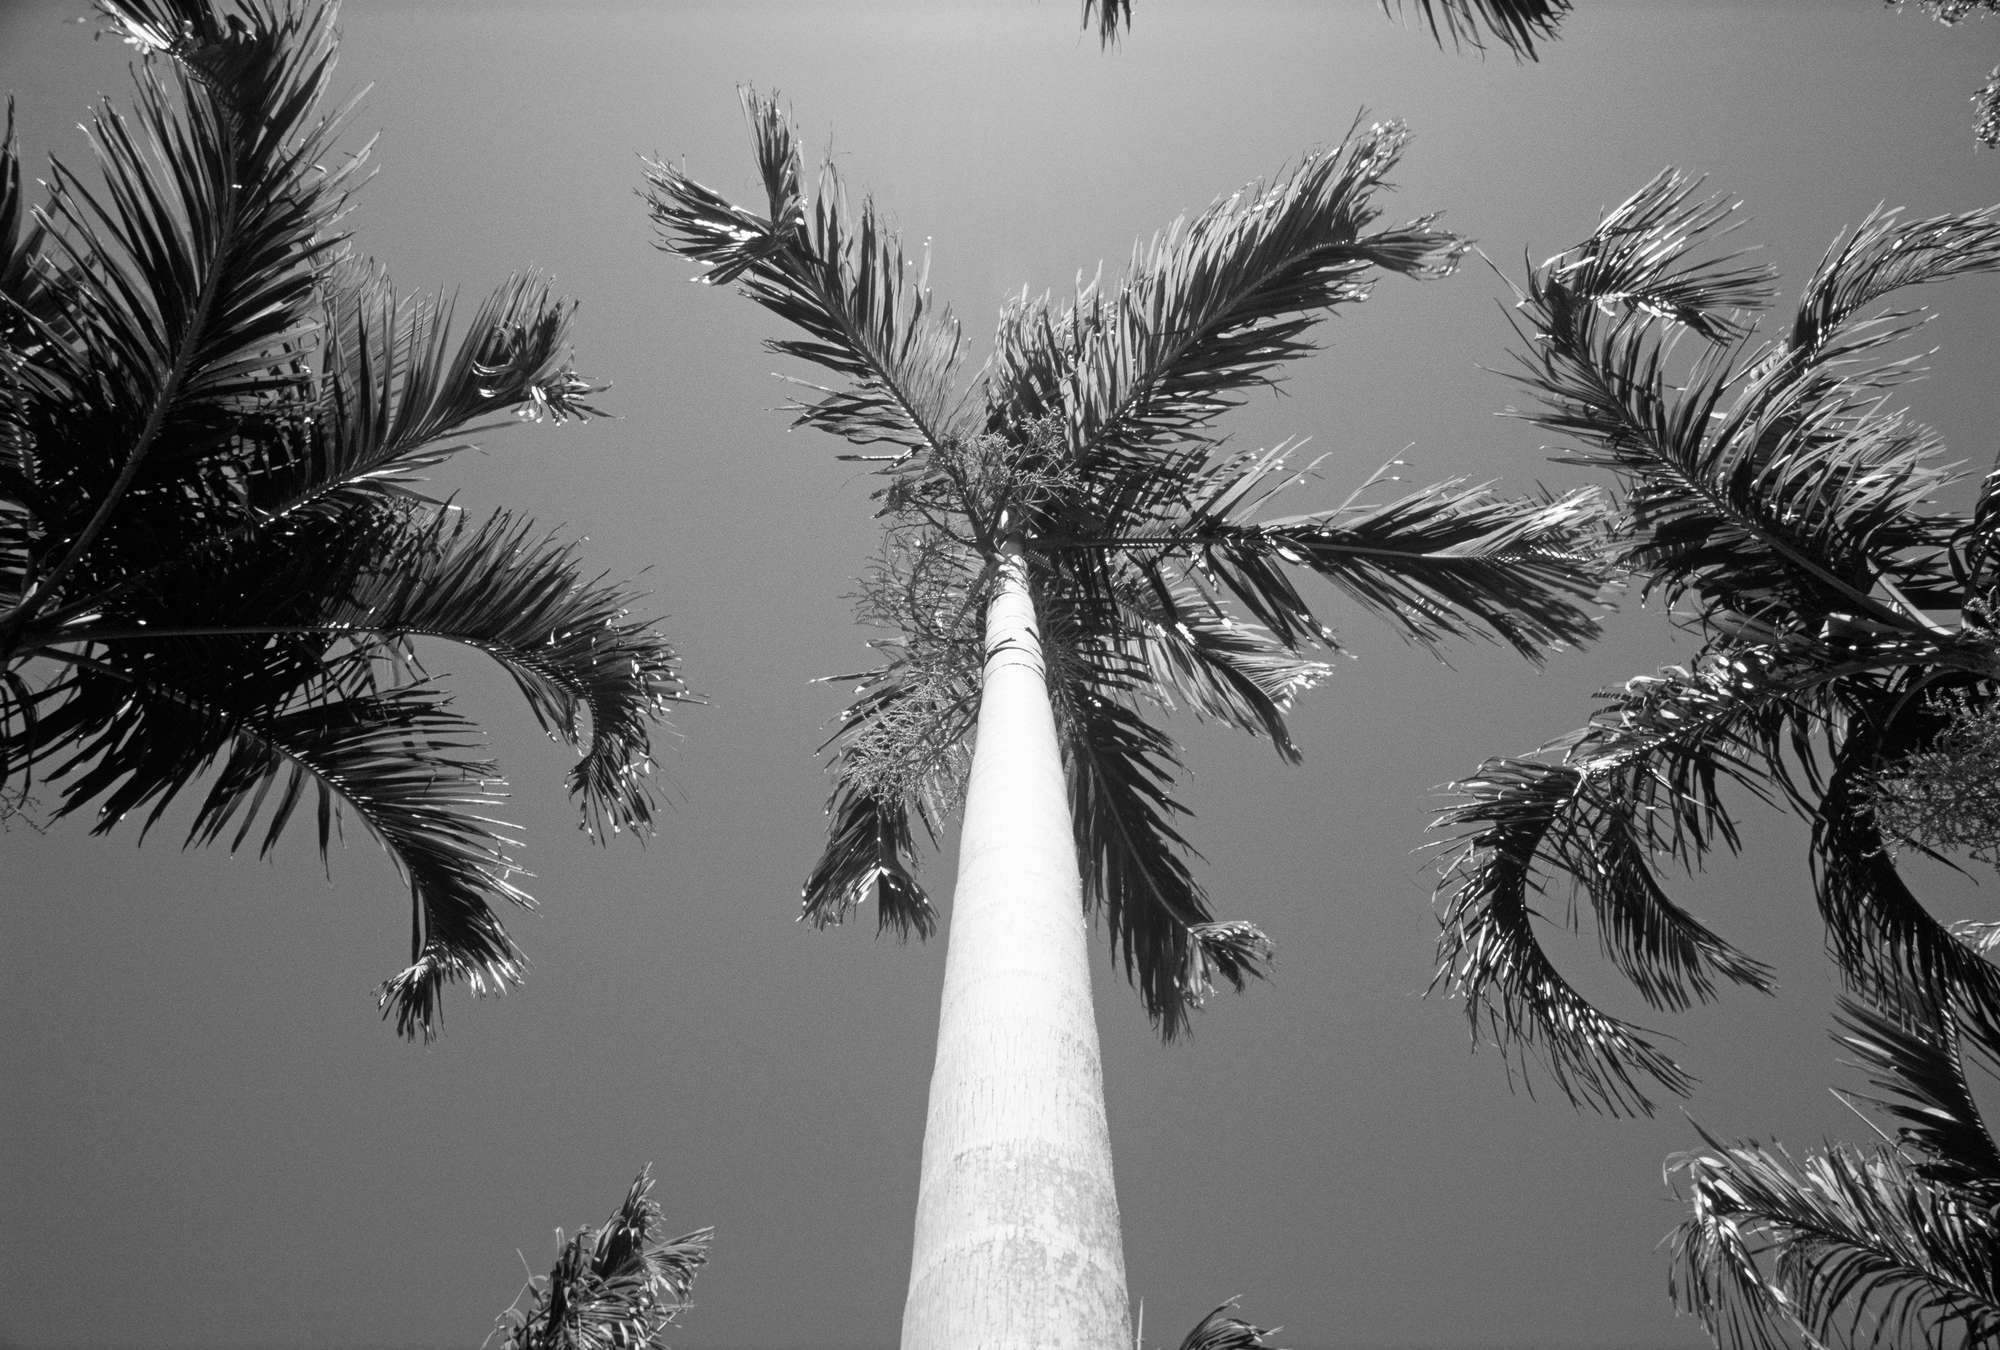             Palm trees - black and white mural with palm trees
        